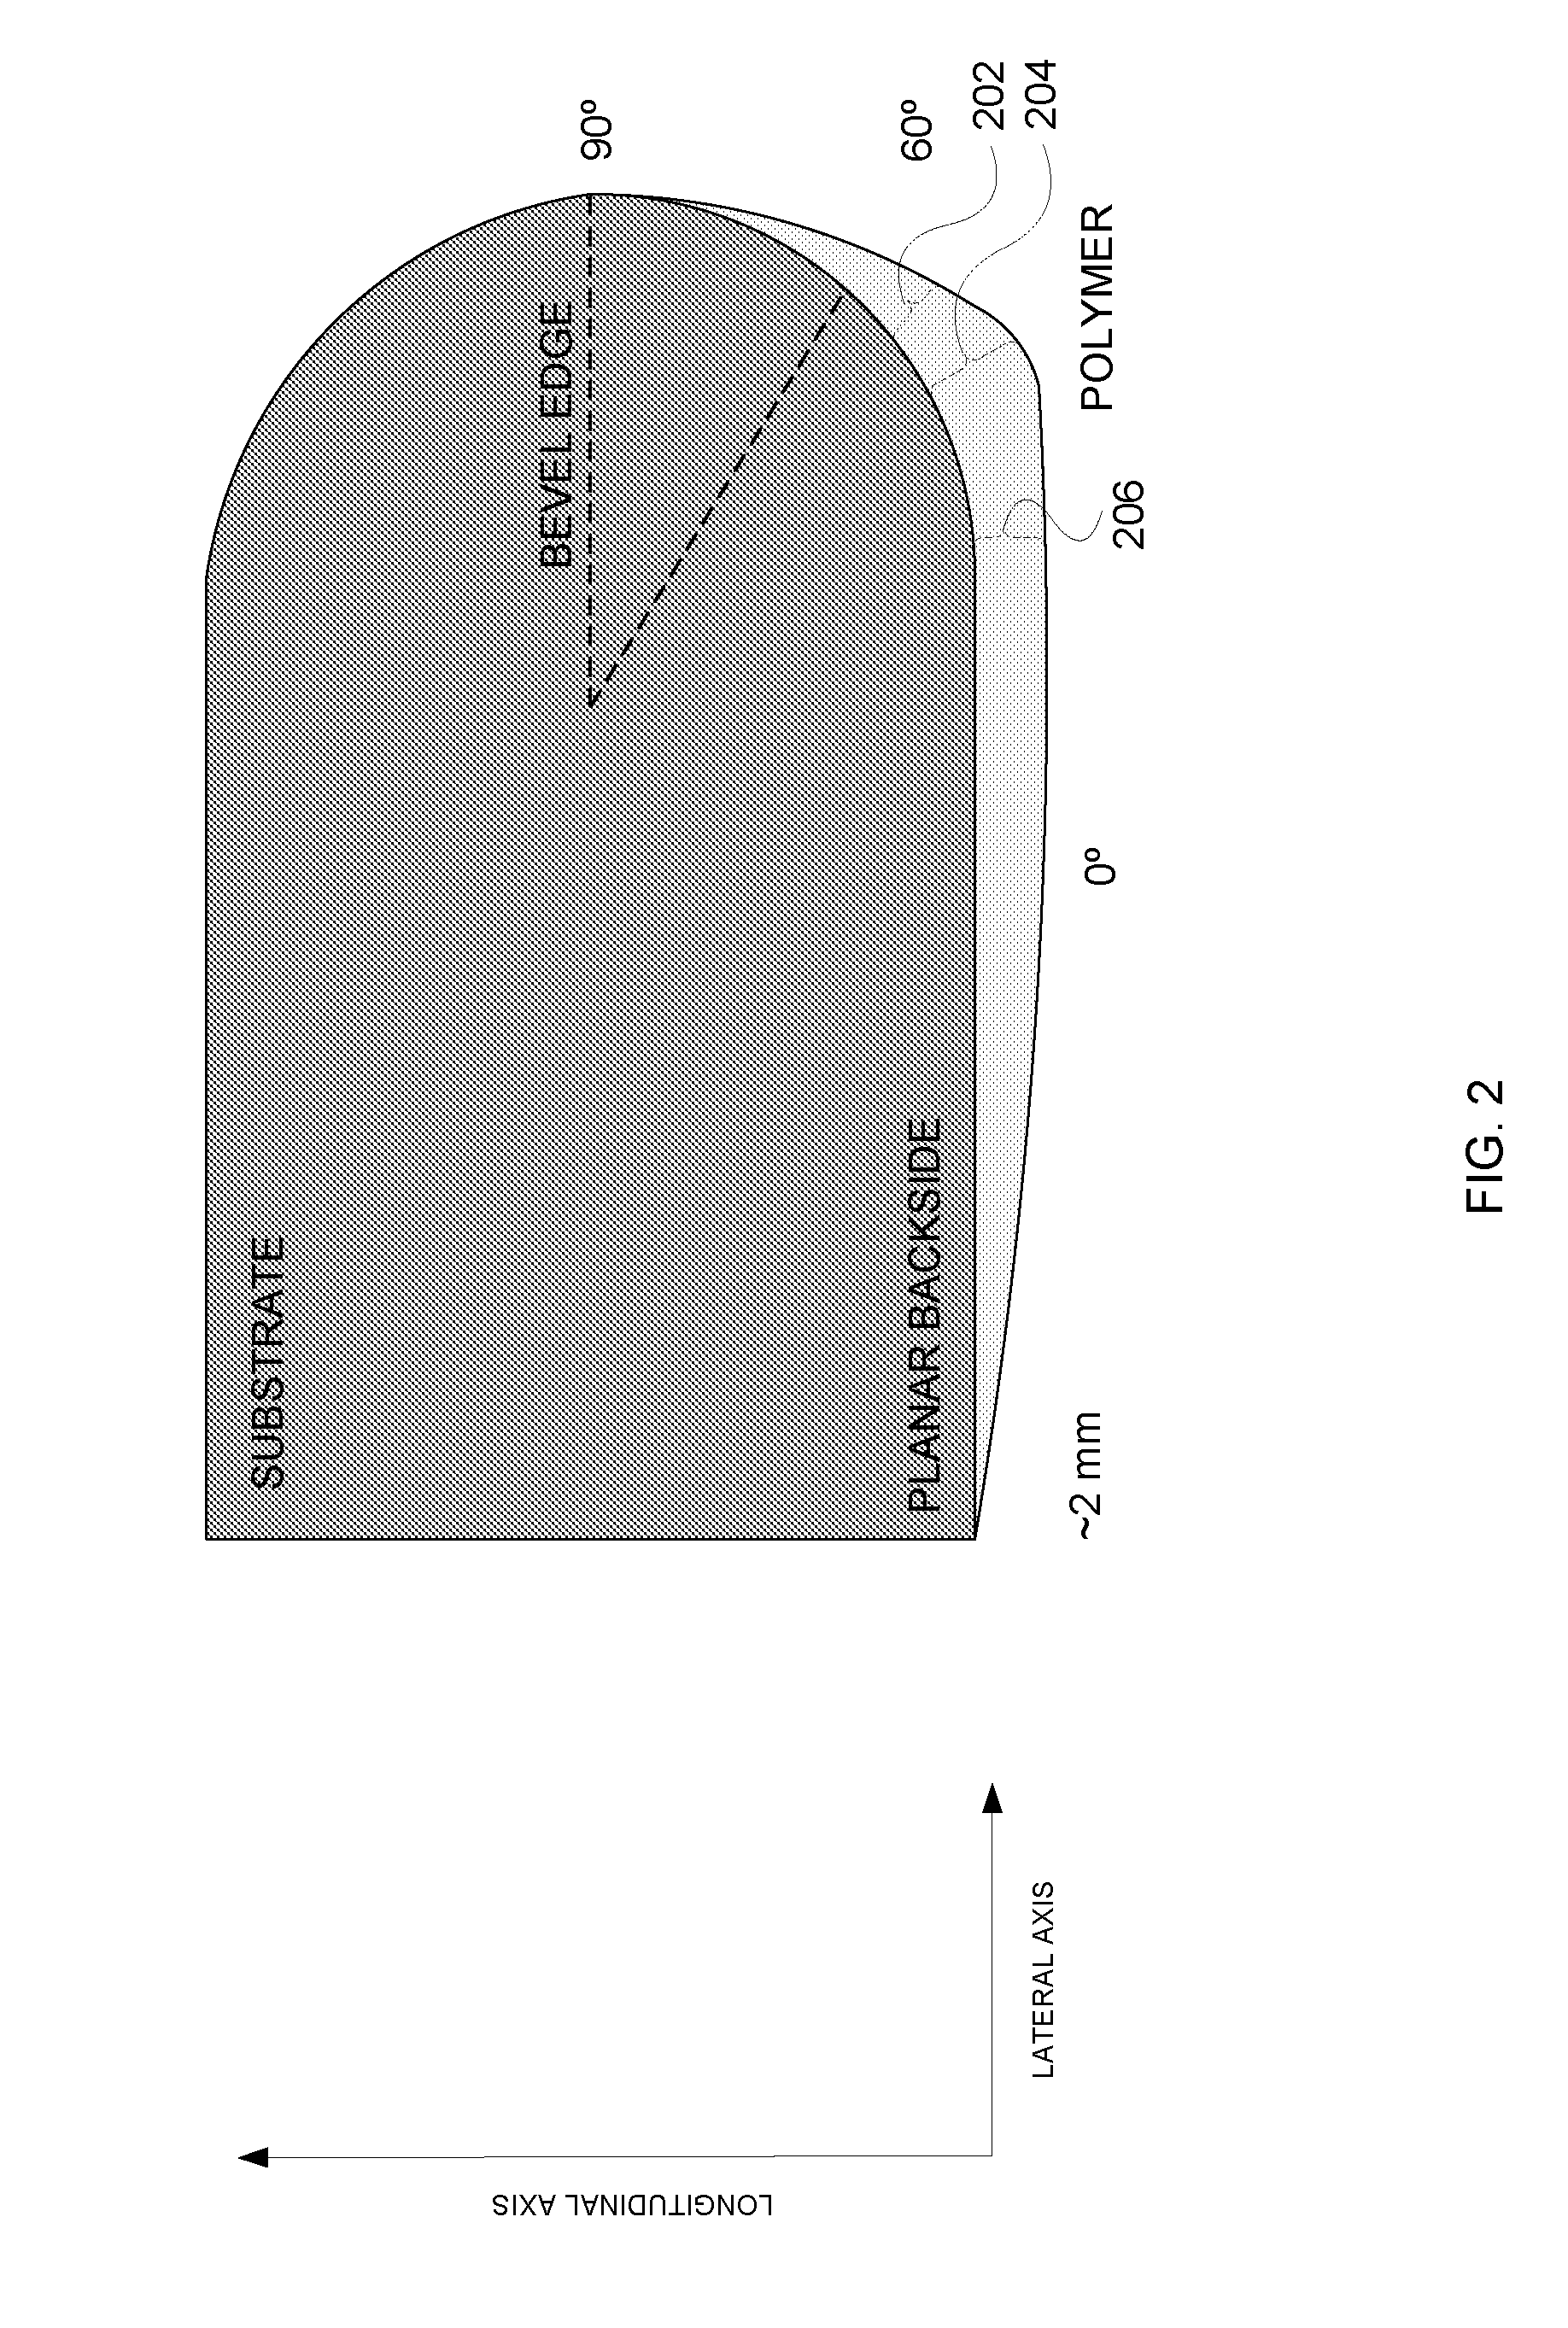 Apparatus and methods for adjusting an edge ring potential substrate processing